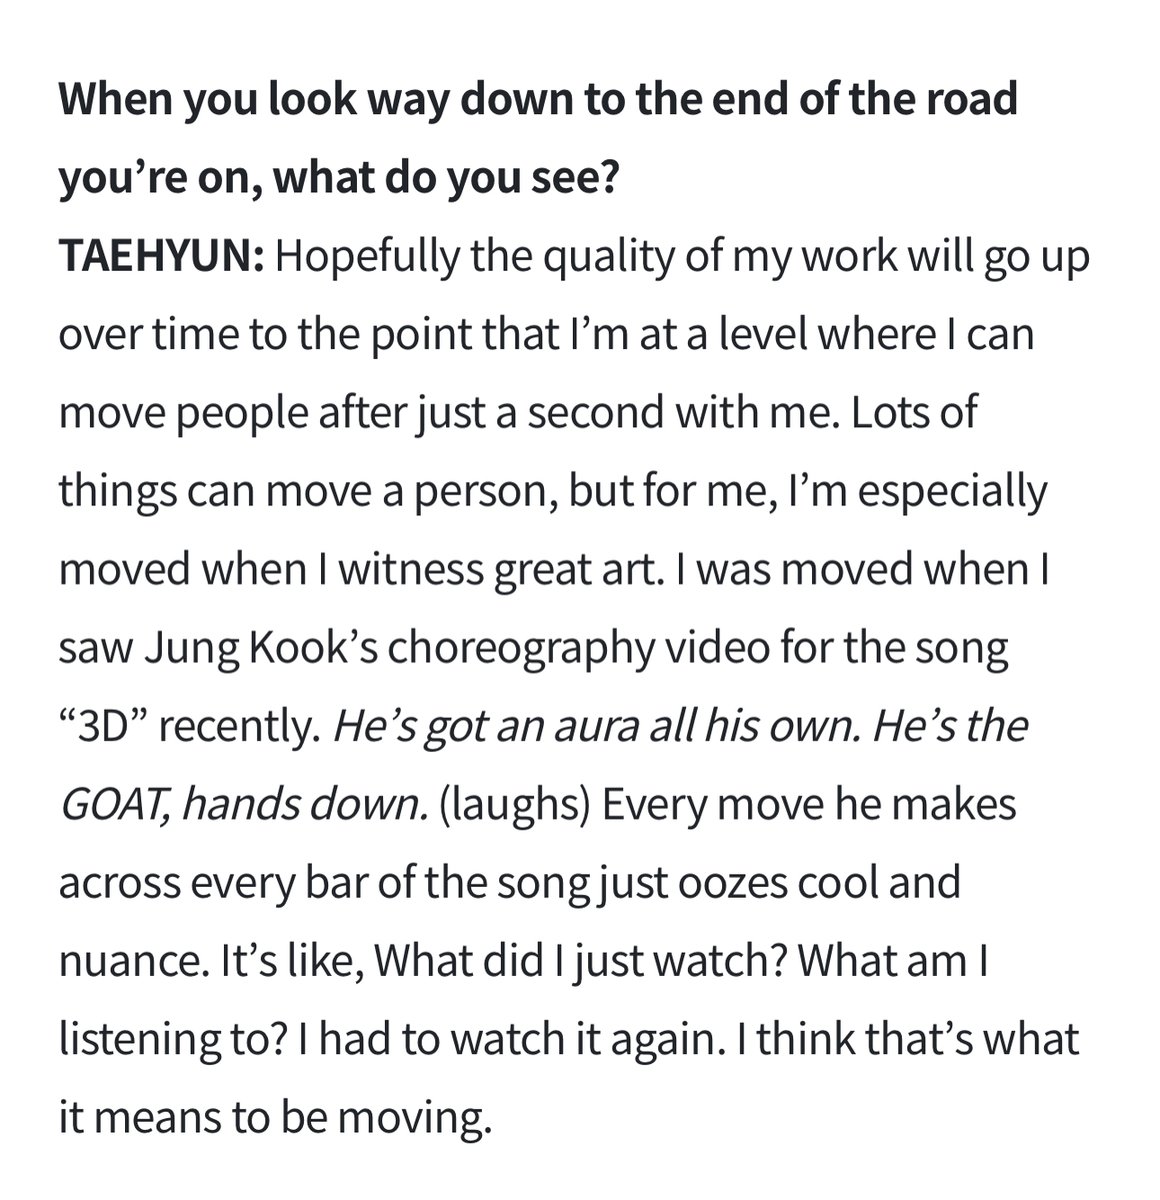 Taehyun (TXT) via Weverse Magazine

Lots of things can move a person, but for me, I’m especially moved when I witness great art. I was moved when I saw Jungkook's choreography video for the song “3D” recently. He’s got an aura all his own. He’s the GOAT, hands down. (laughs)